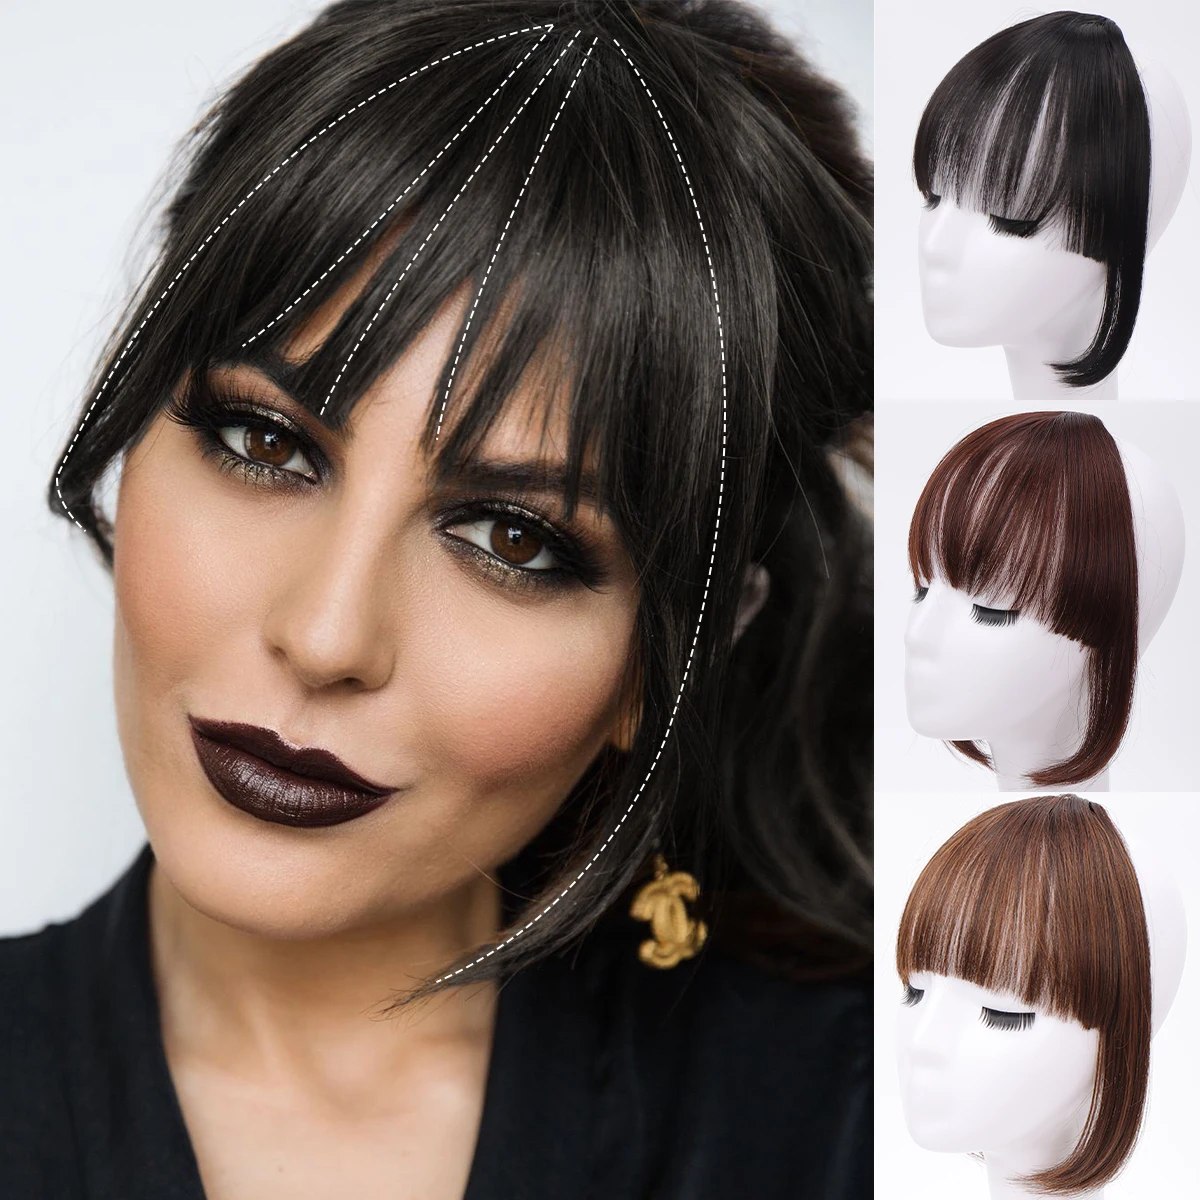 

QUEENYANG Synthetic Bangs Clip In Hair Bang Extension The Front Middle Bangs Synthetic Fake Fringed Wig Hairpiece Accessories